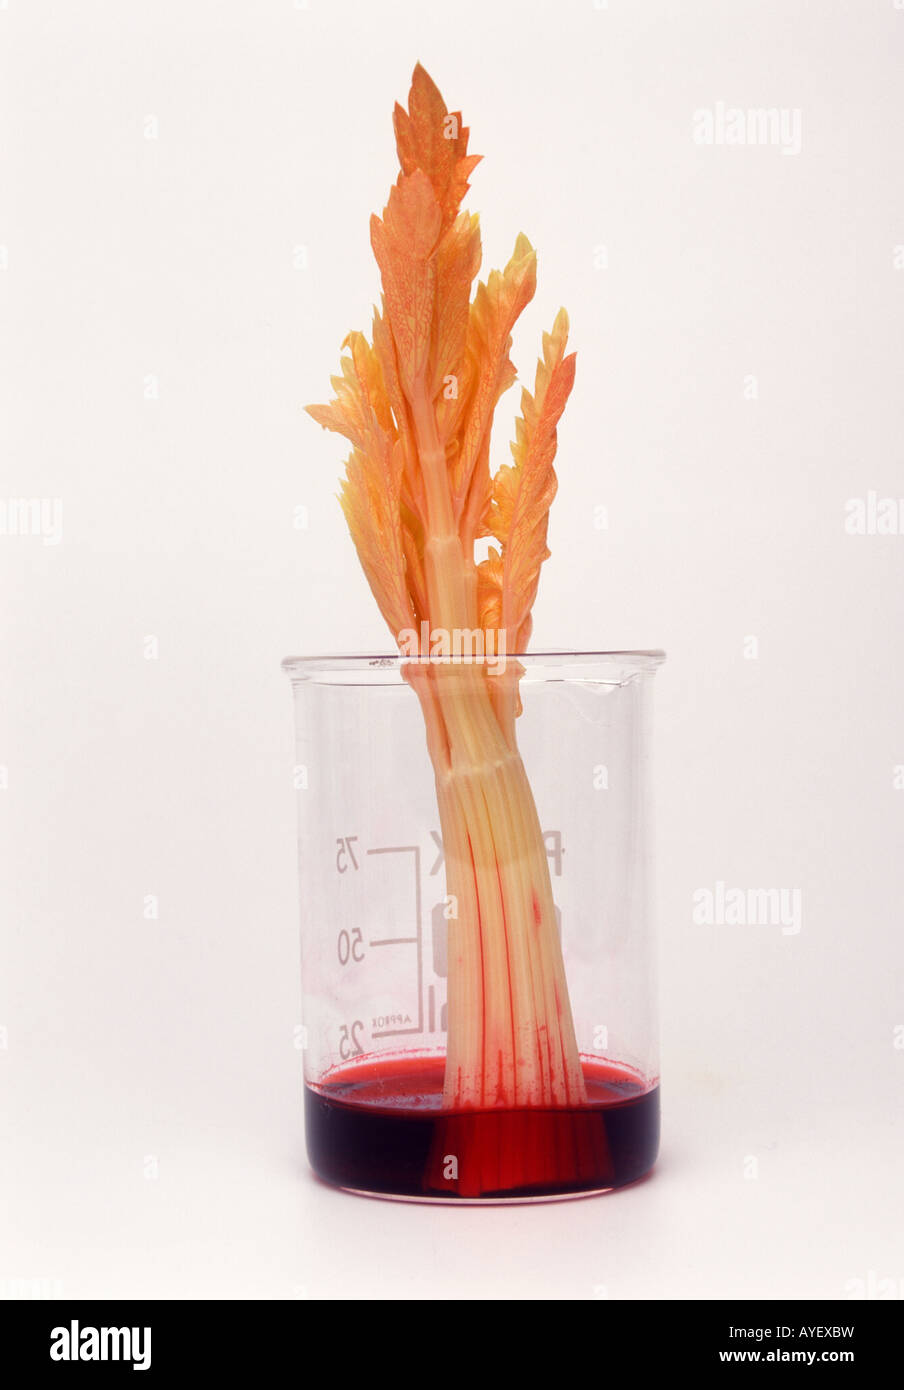 Celery in red dye which travels up the stem through the vascular pores or bundles Stock Photo